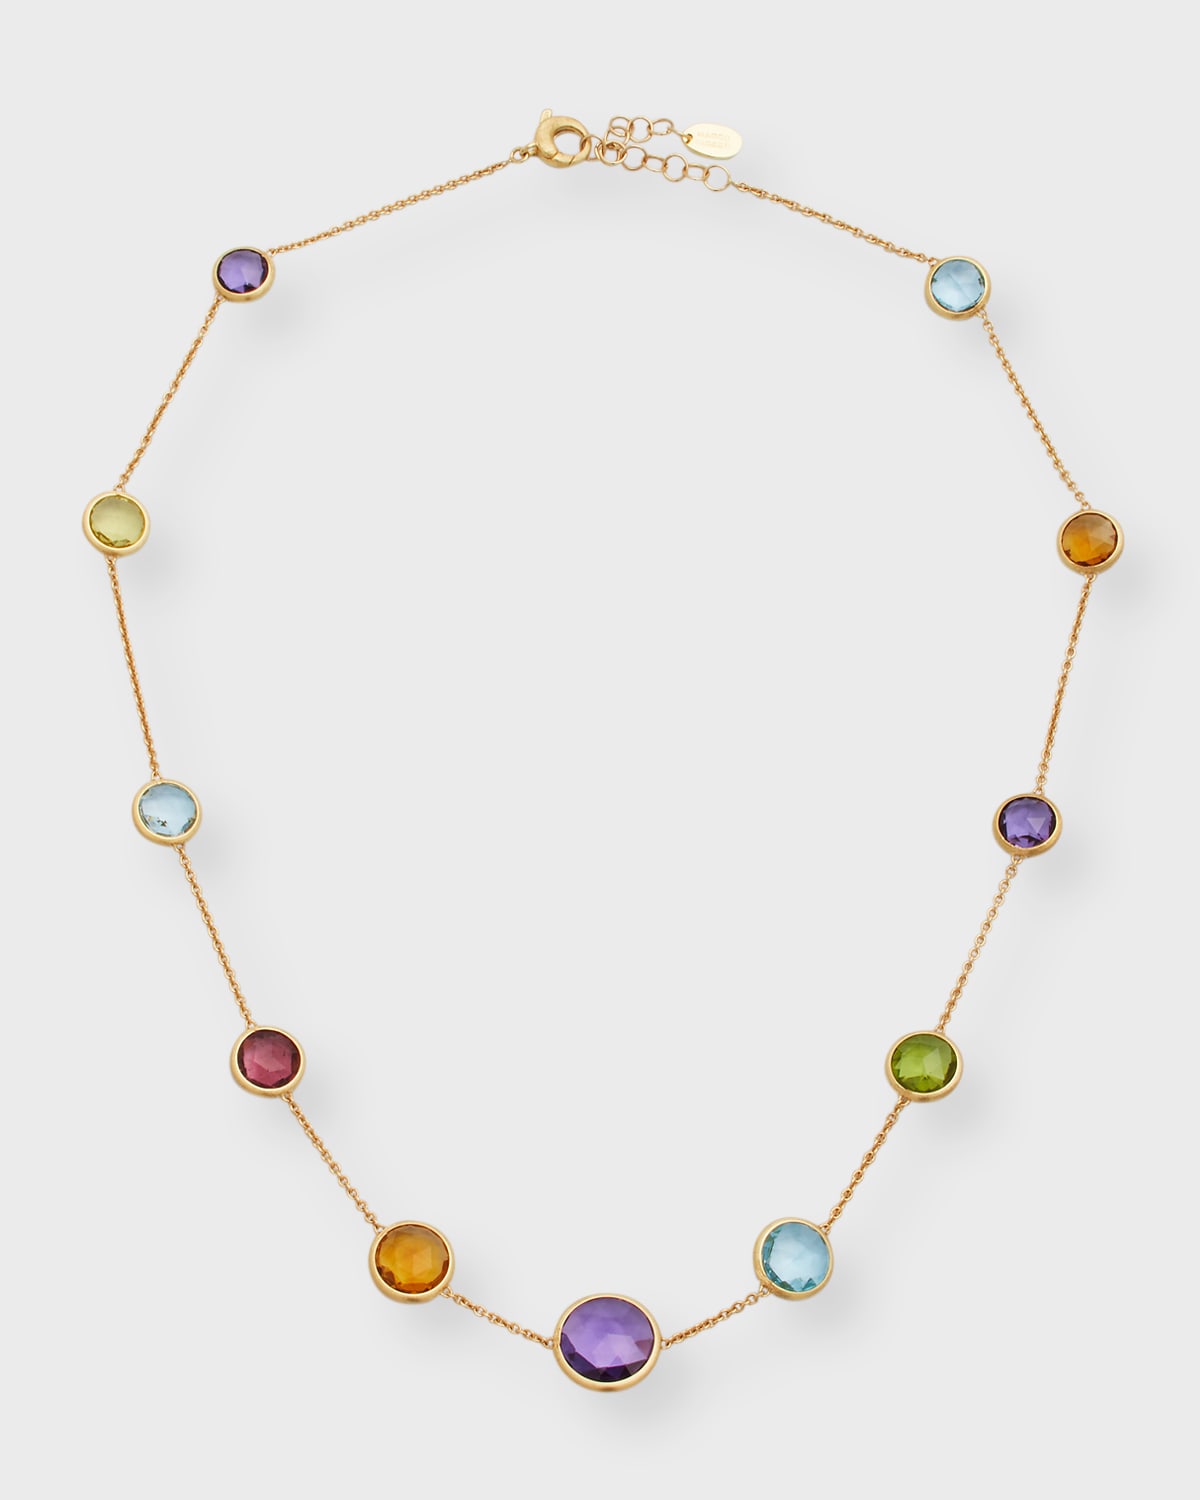 Marco Bicego Jaipur Color Single Strand Necklace with Mixed Stones, 18"L